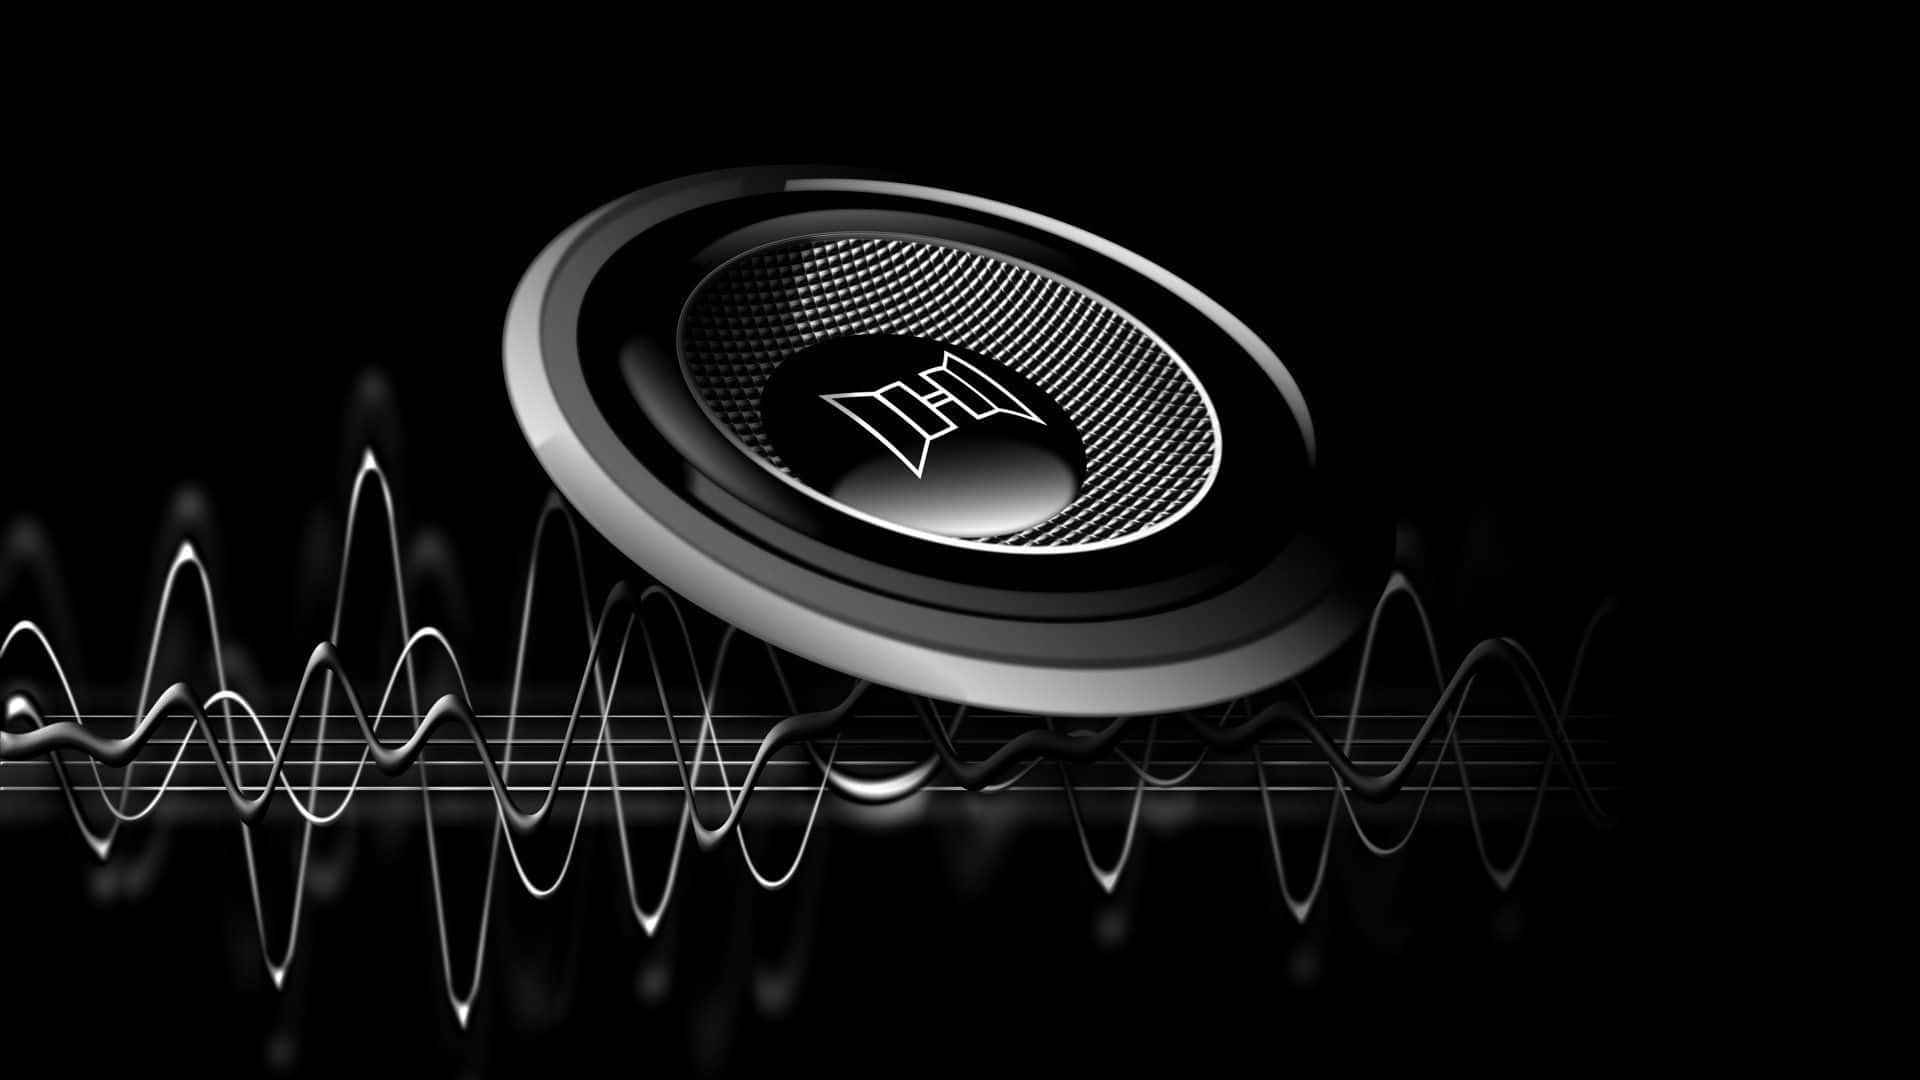 Black Music Speaker With Sound Waves Picture